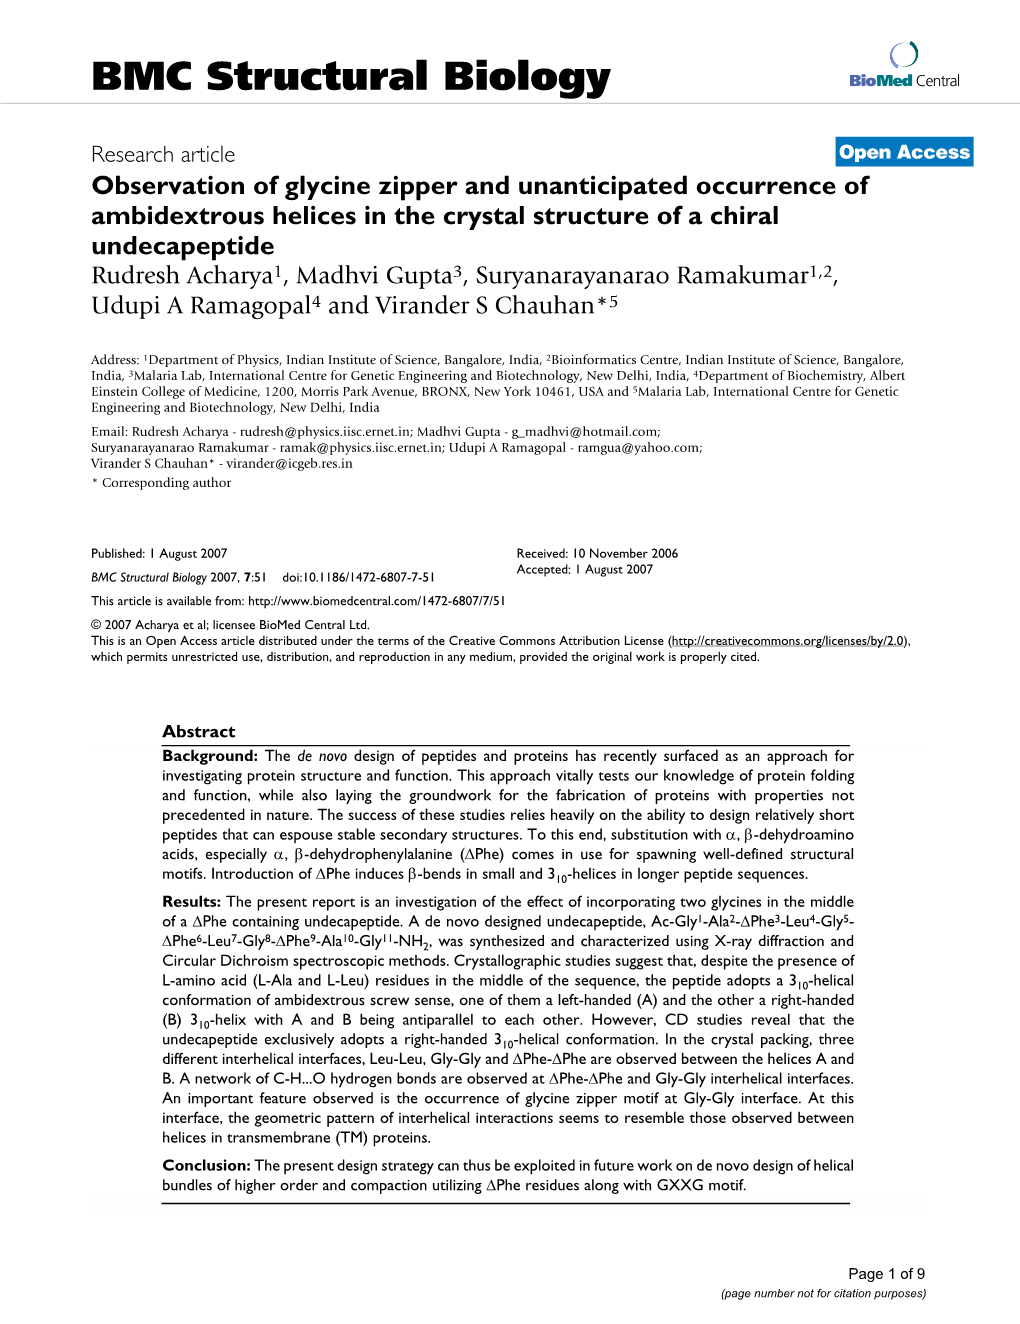 Observation of Glycine Zipper and Unanticipated Occurrence Of